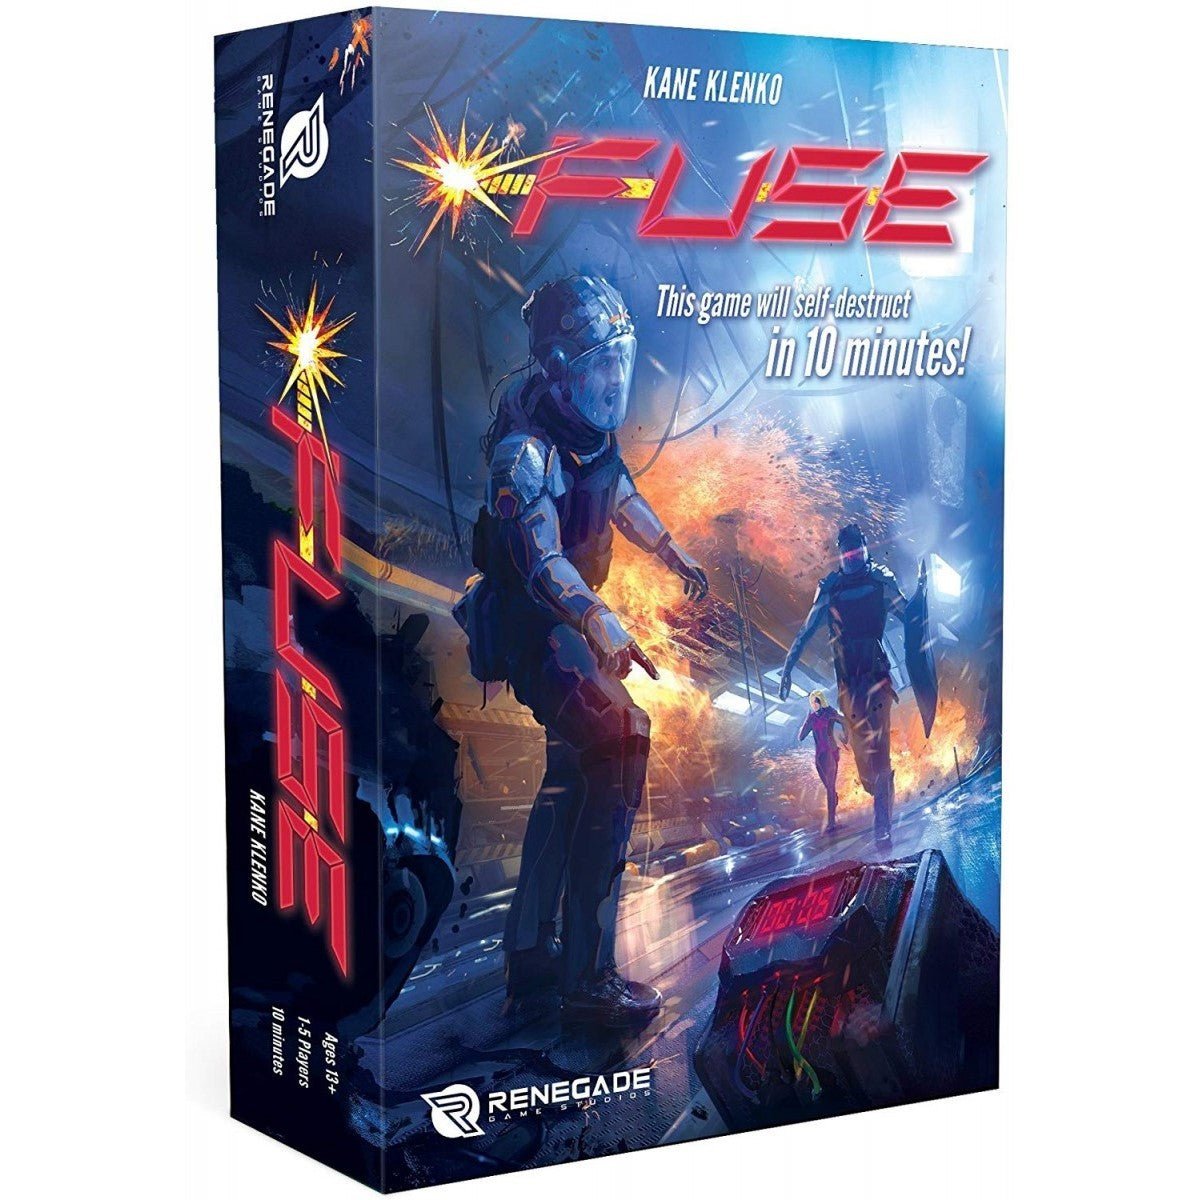 Product image and info for Fuse